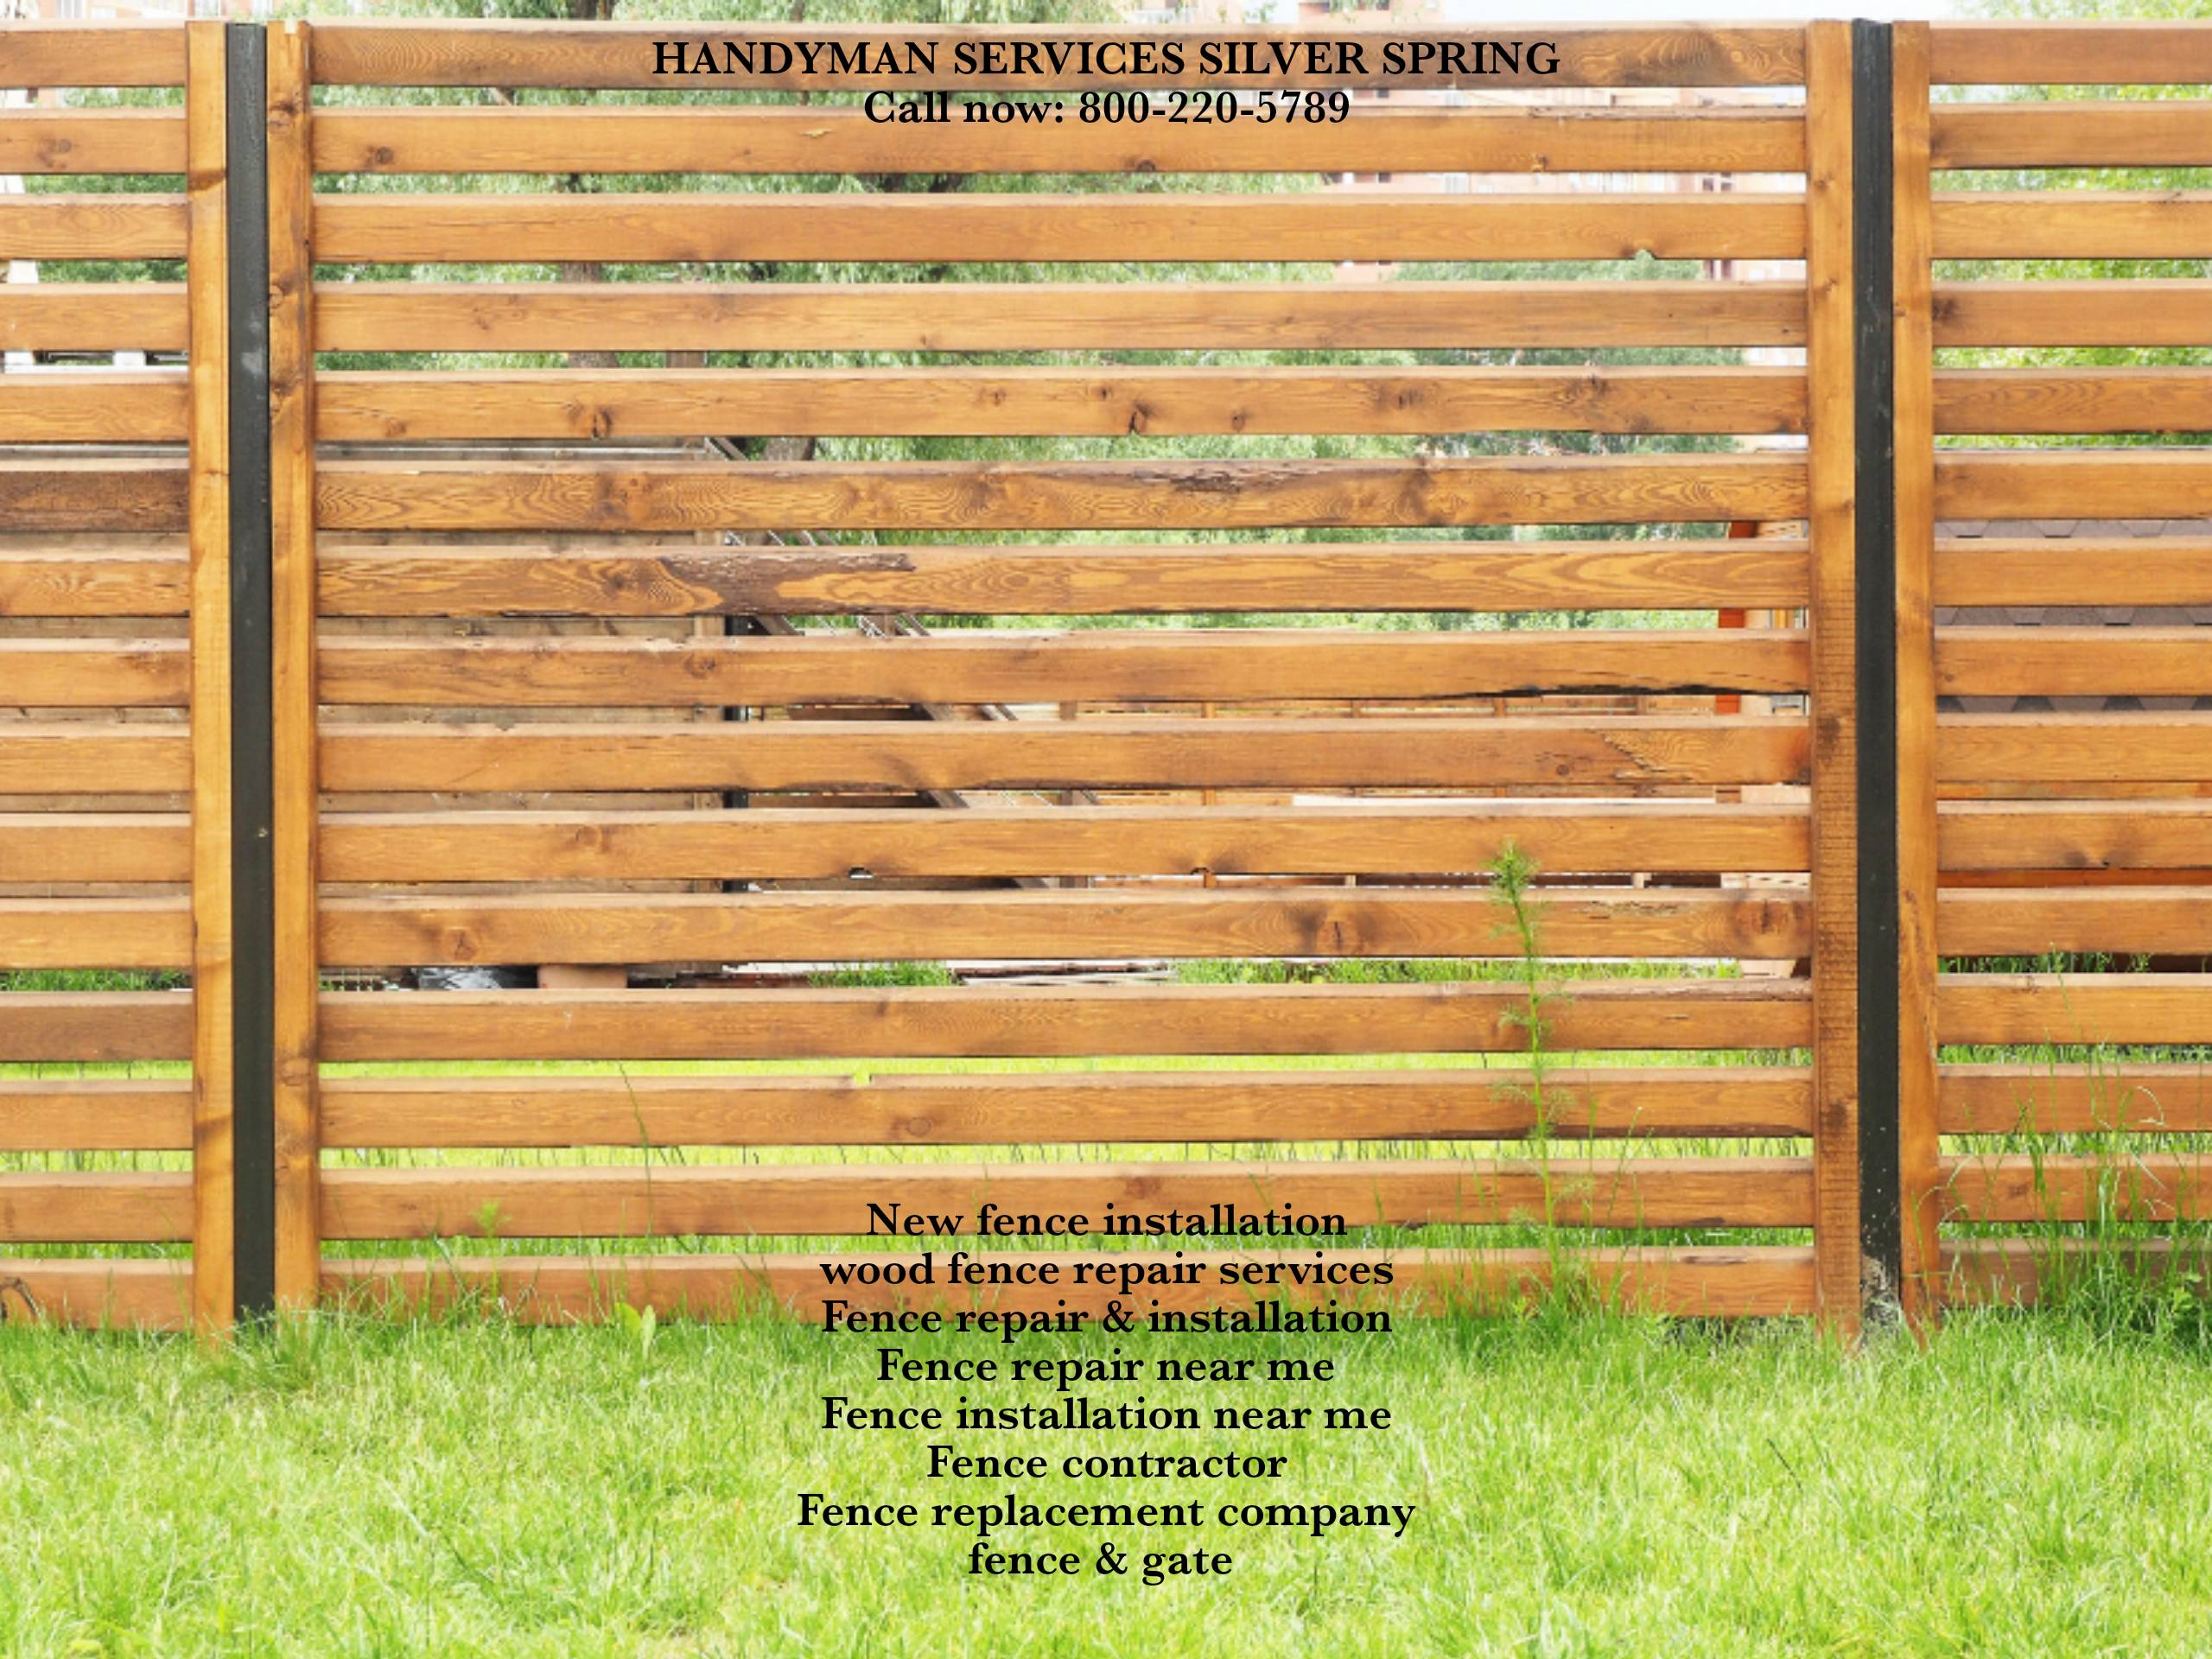 Why Do You Need Professional Fence Services?